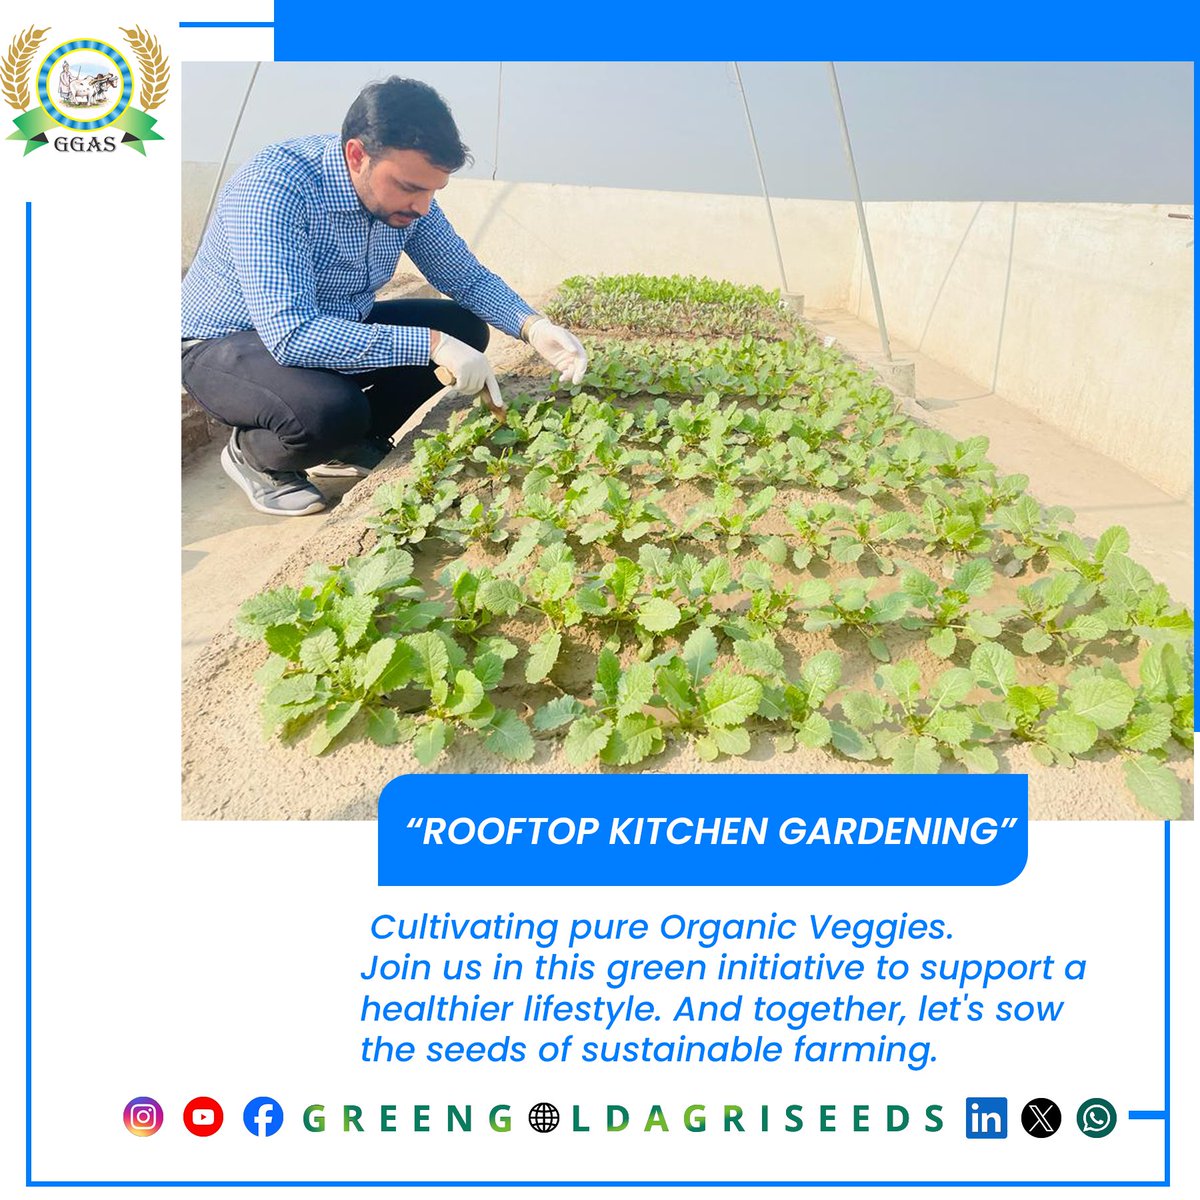 🌱 Exciting News from Green Gold Agri Seeds Pvt. Ltd.! 🌿 We're thrilled to announce the launch of our Kitchen #GreenGoldKitchenGarden #SustainableFarming #organicharvest #GreenGoldAgriSeeds #KitchenGardeningProject #OrganicVegetables #SustainableLiving #RooftopGarden